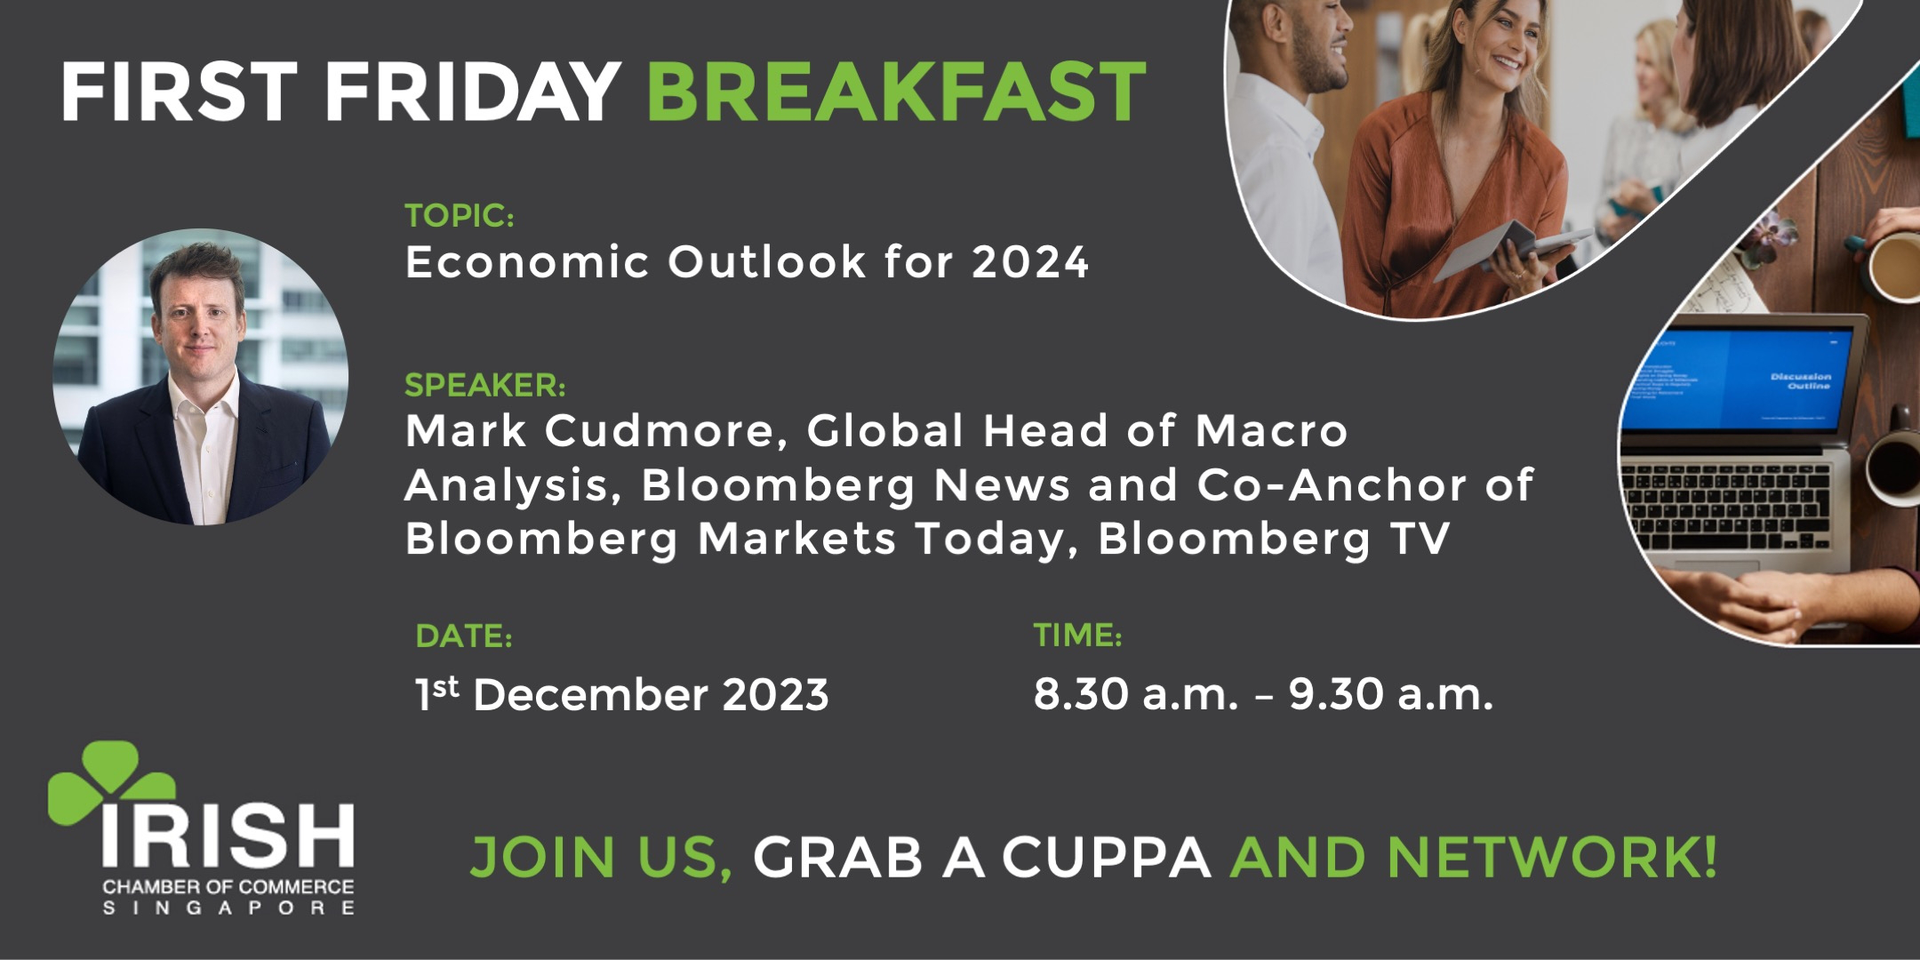 thumbnails December's First Friday Breakfast - Economic Outlook 2024 with Mark Cudmore